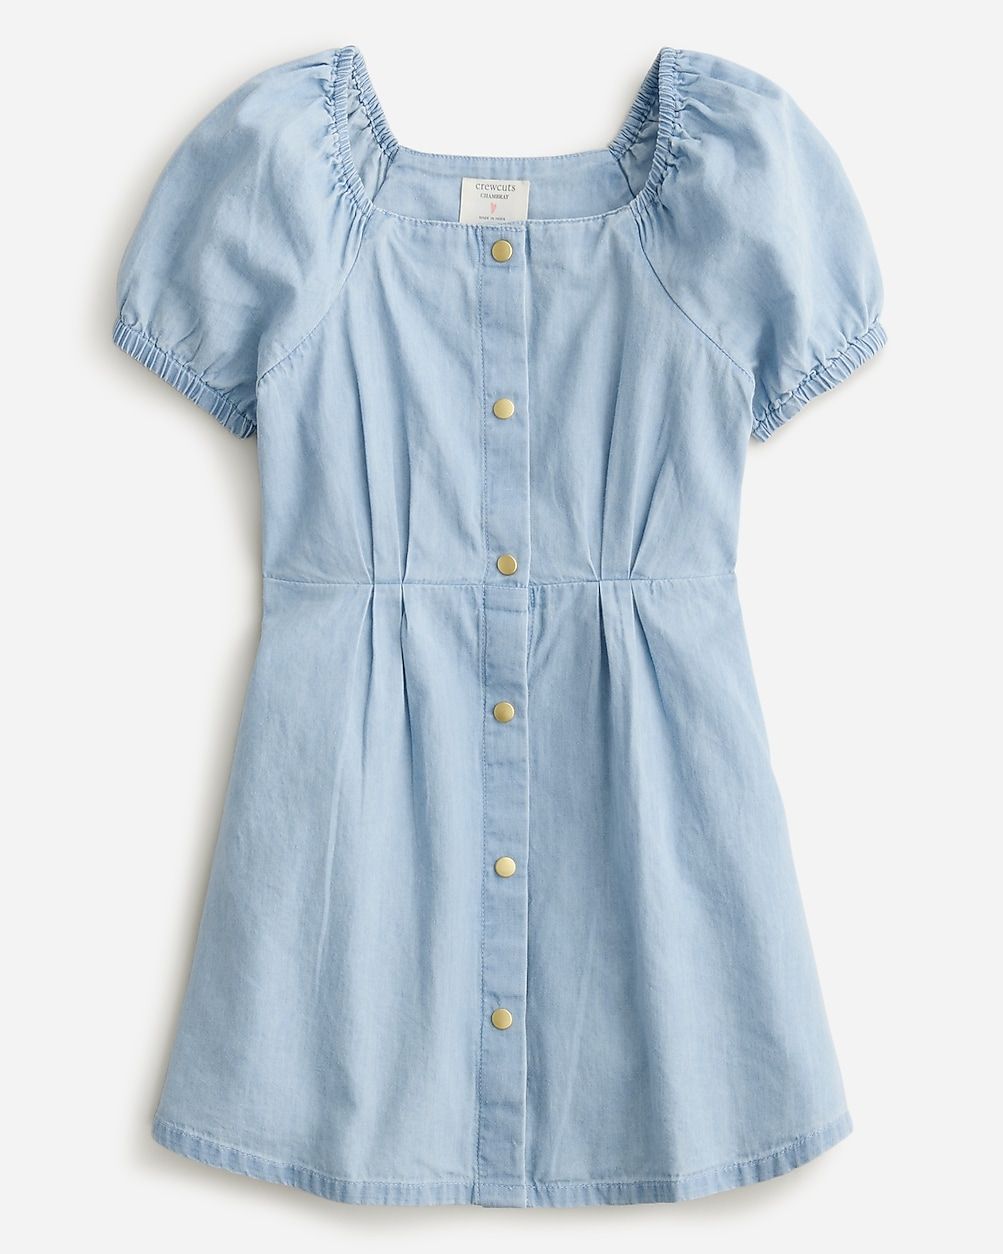 Girls' button-front chambray dress | J.Crew US